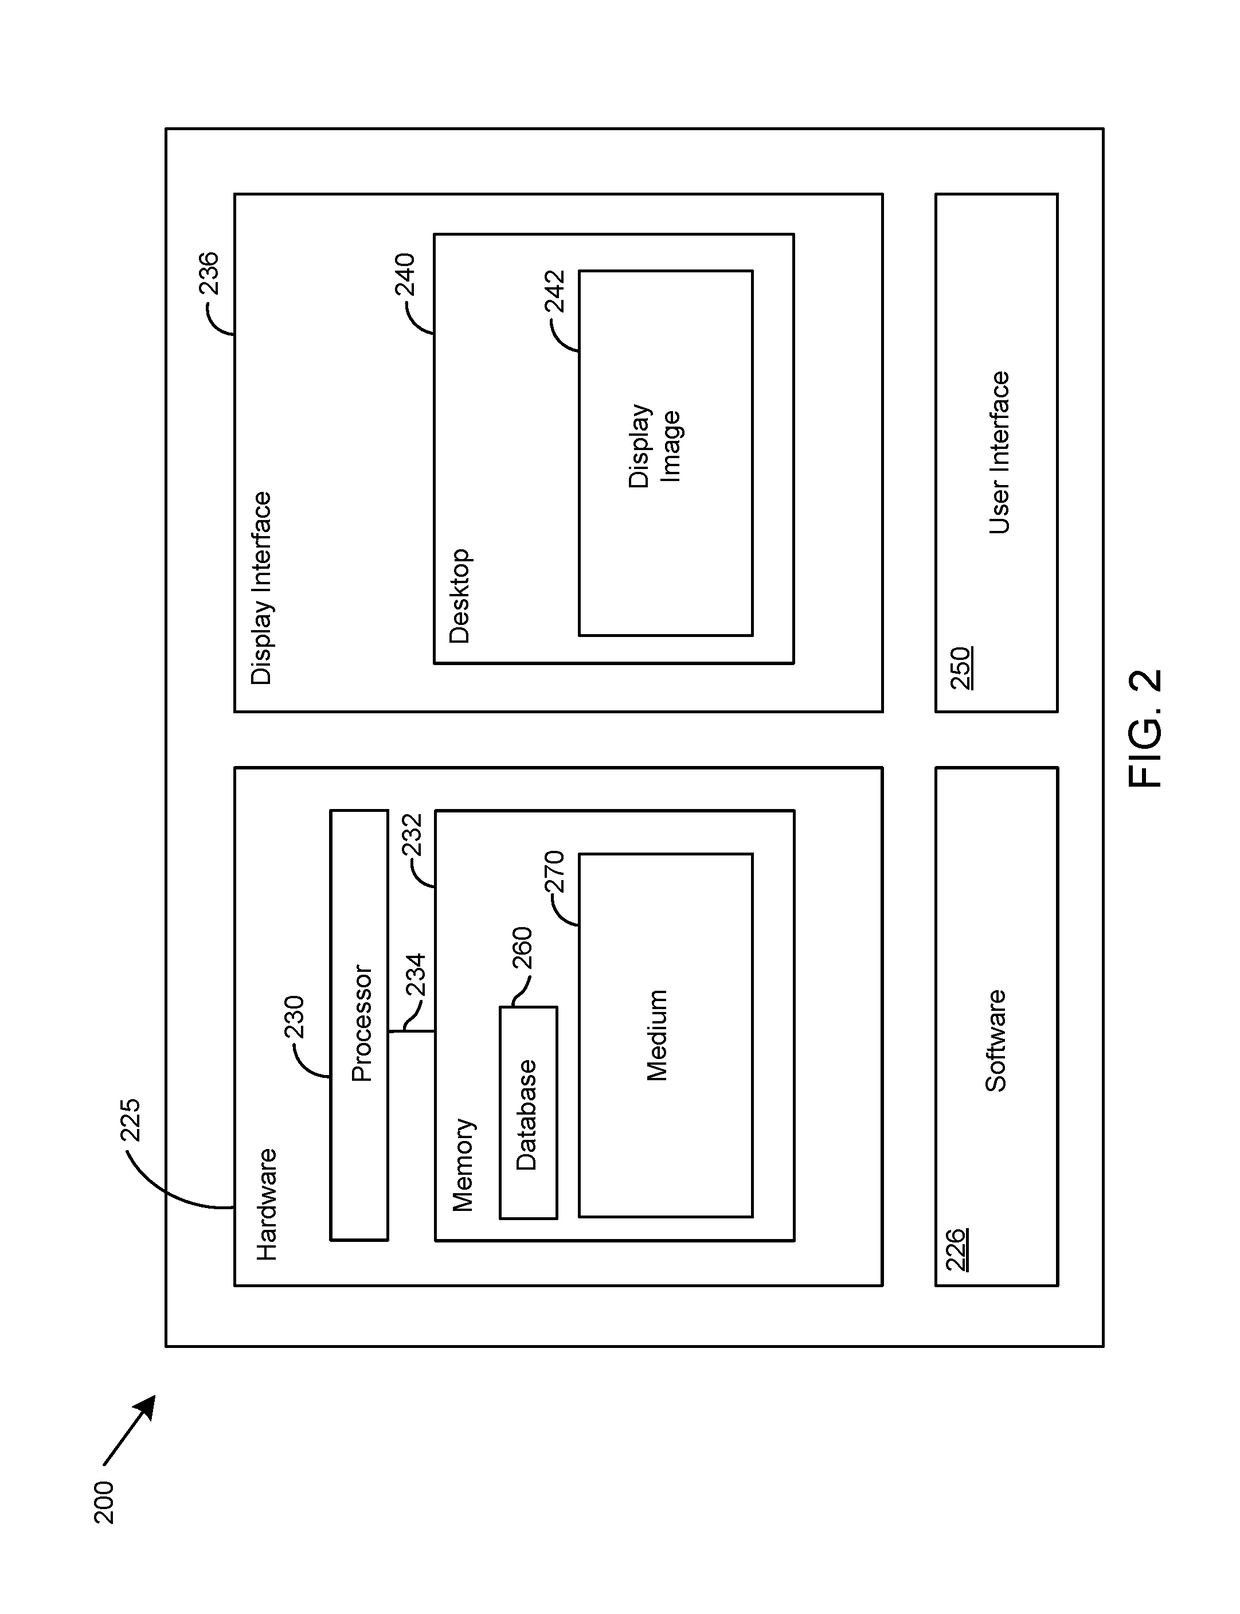 Systems and methods for the patterning of material substrates